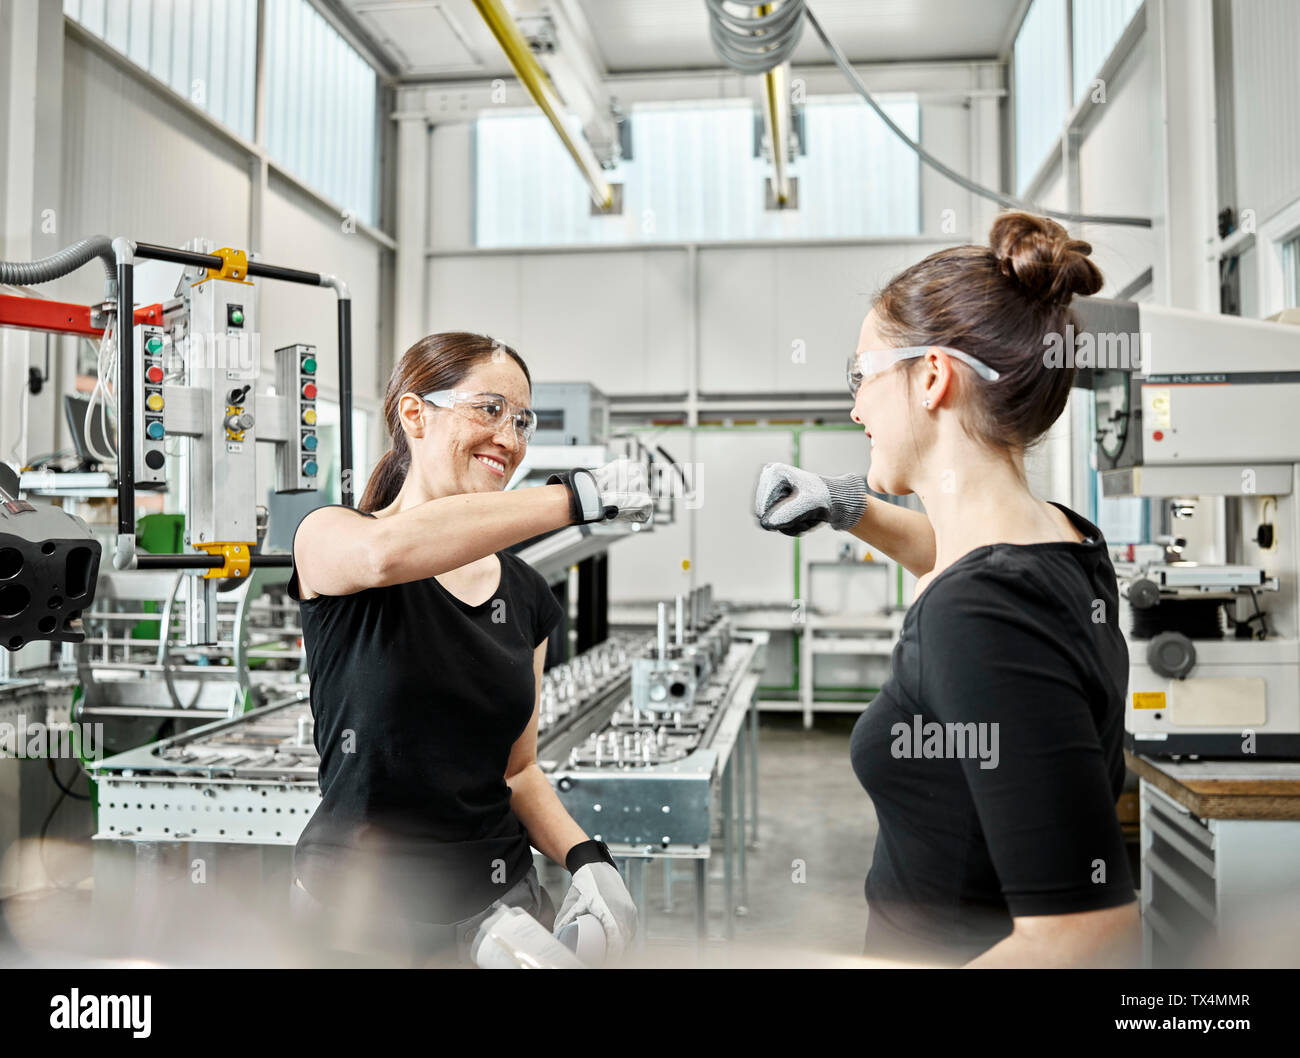 Two women at work, fist bump Stock Photo